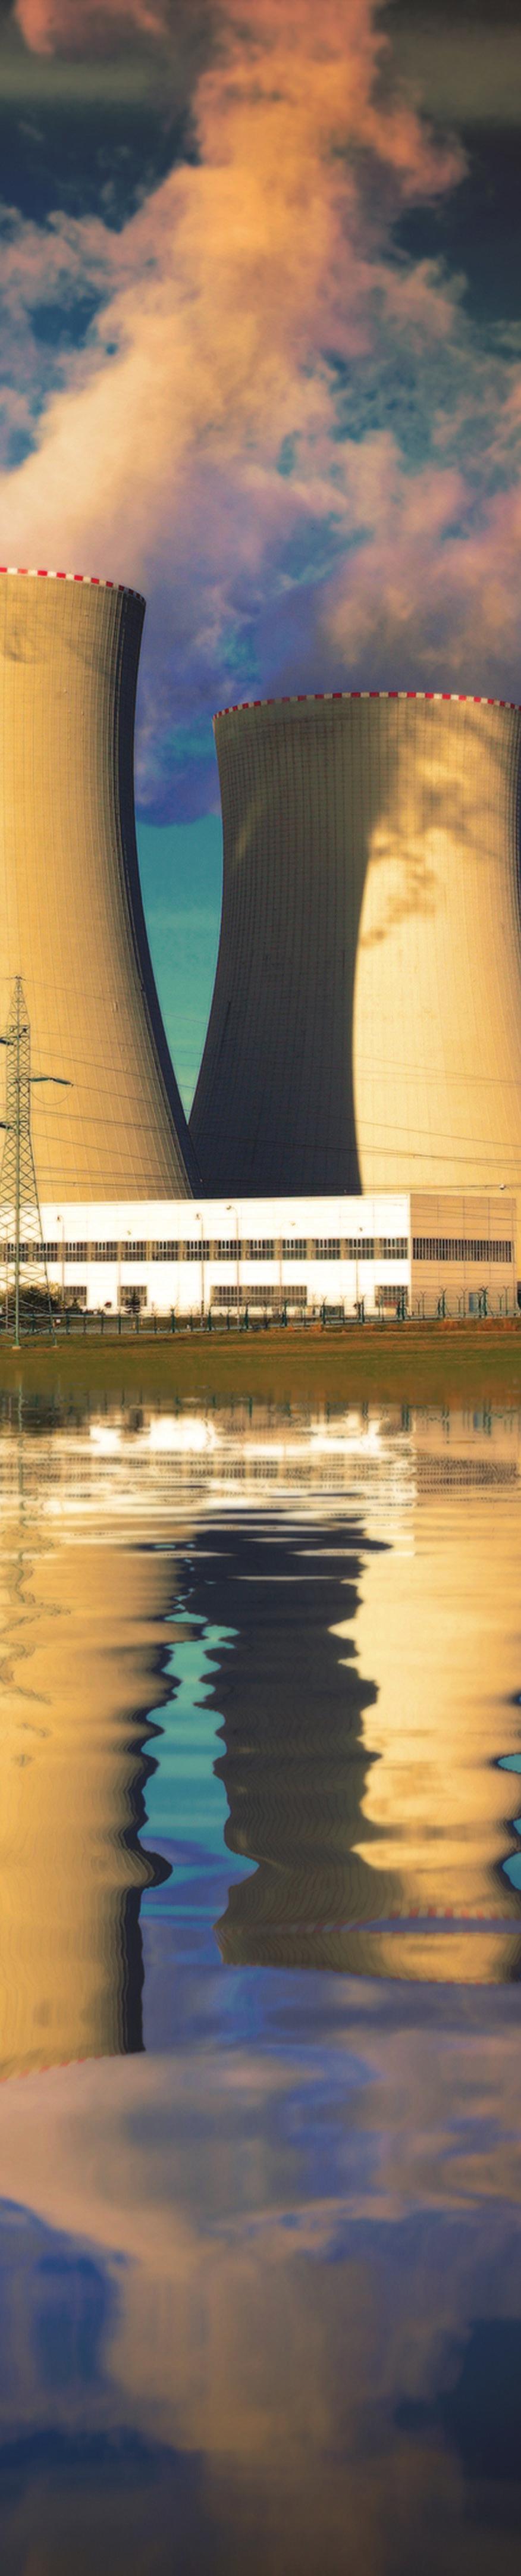 July 2015 State Regulatory Authority Over Nuclear Waste Facilities In 2012, the Blue Ribbon Commission on America s Nuclear Future (BRC) called for a new, consent-based approach to siting disposal